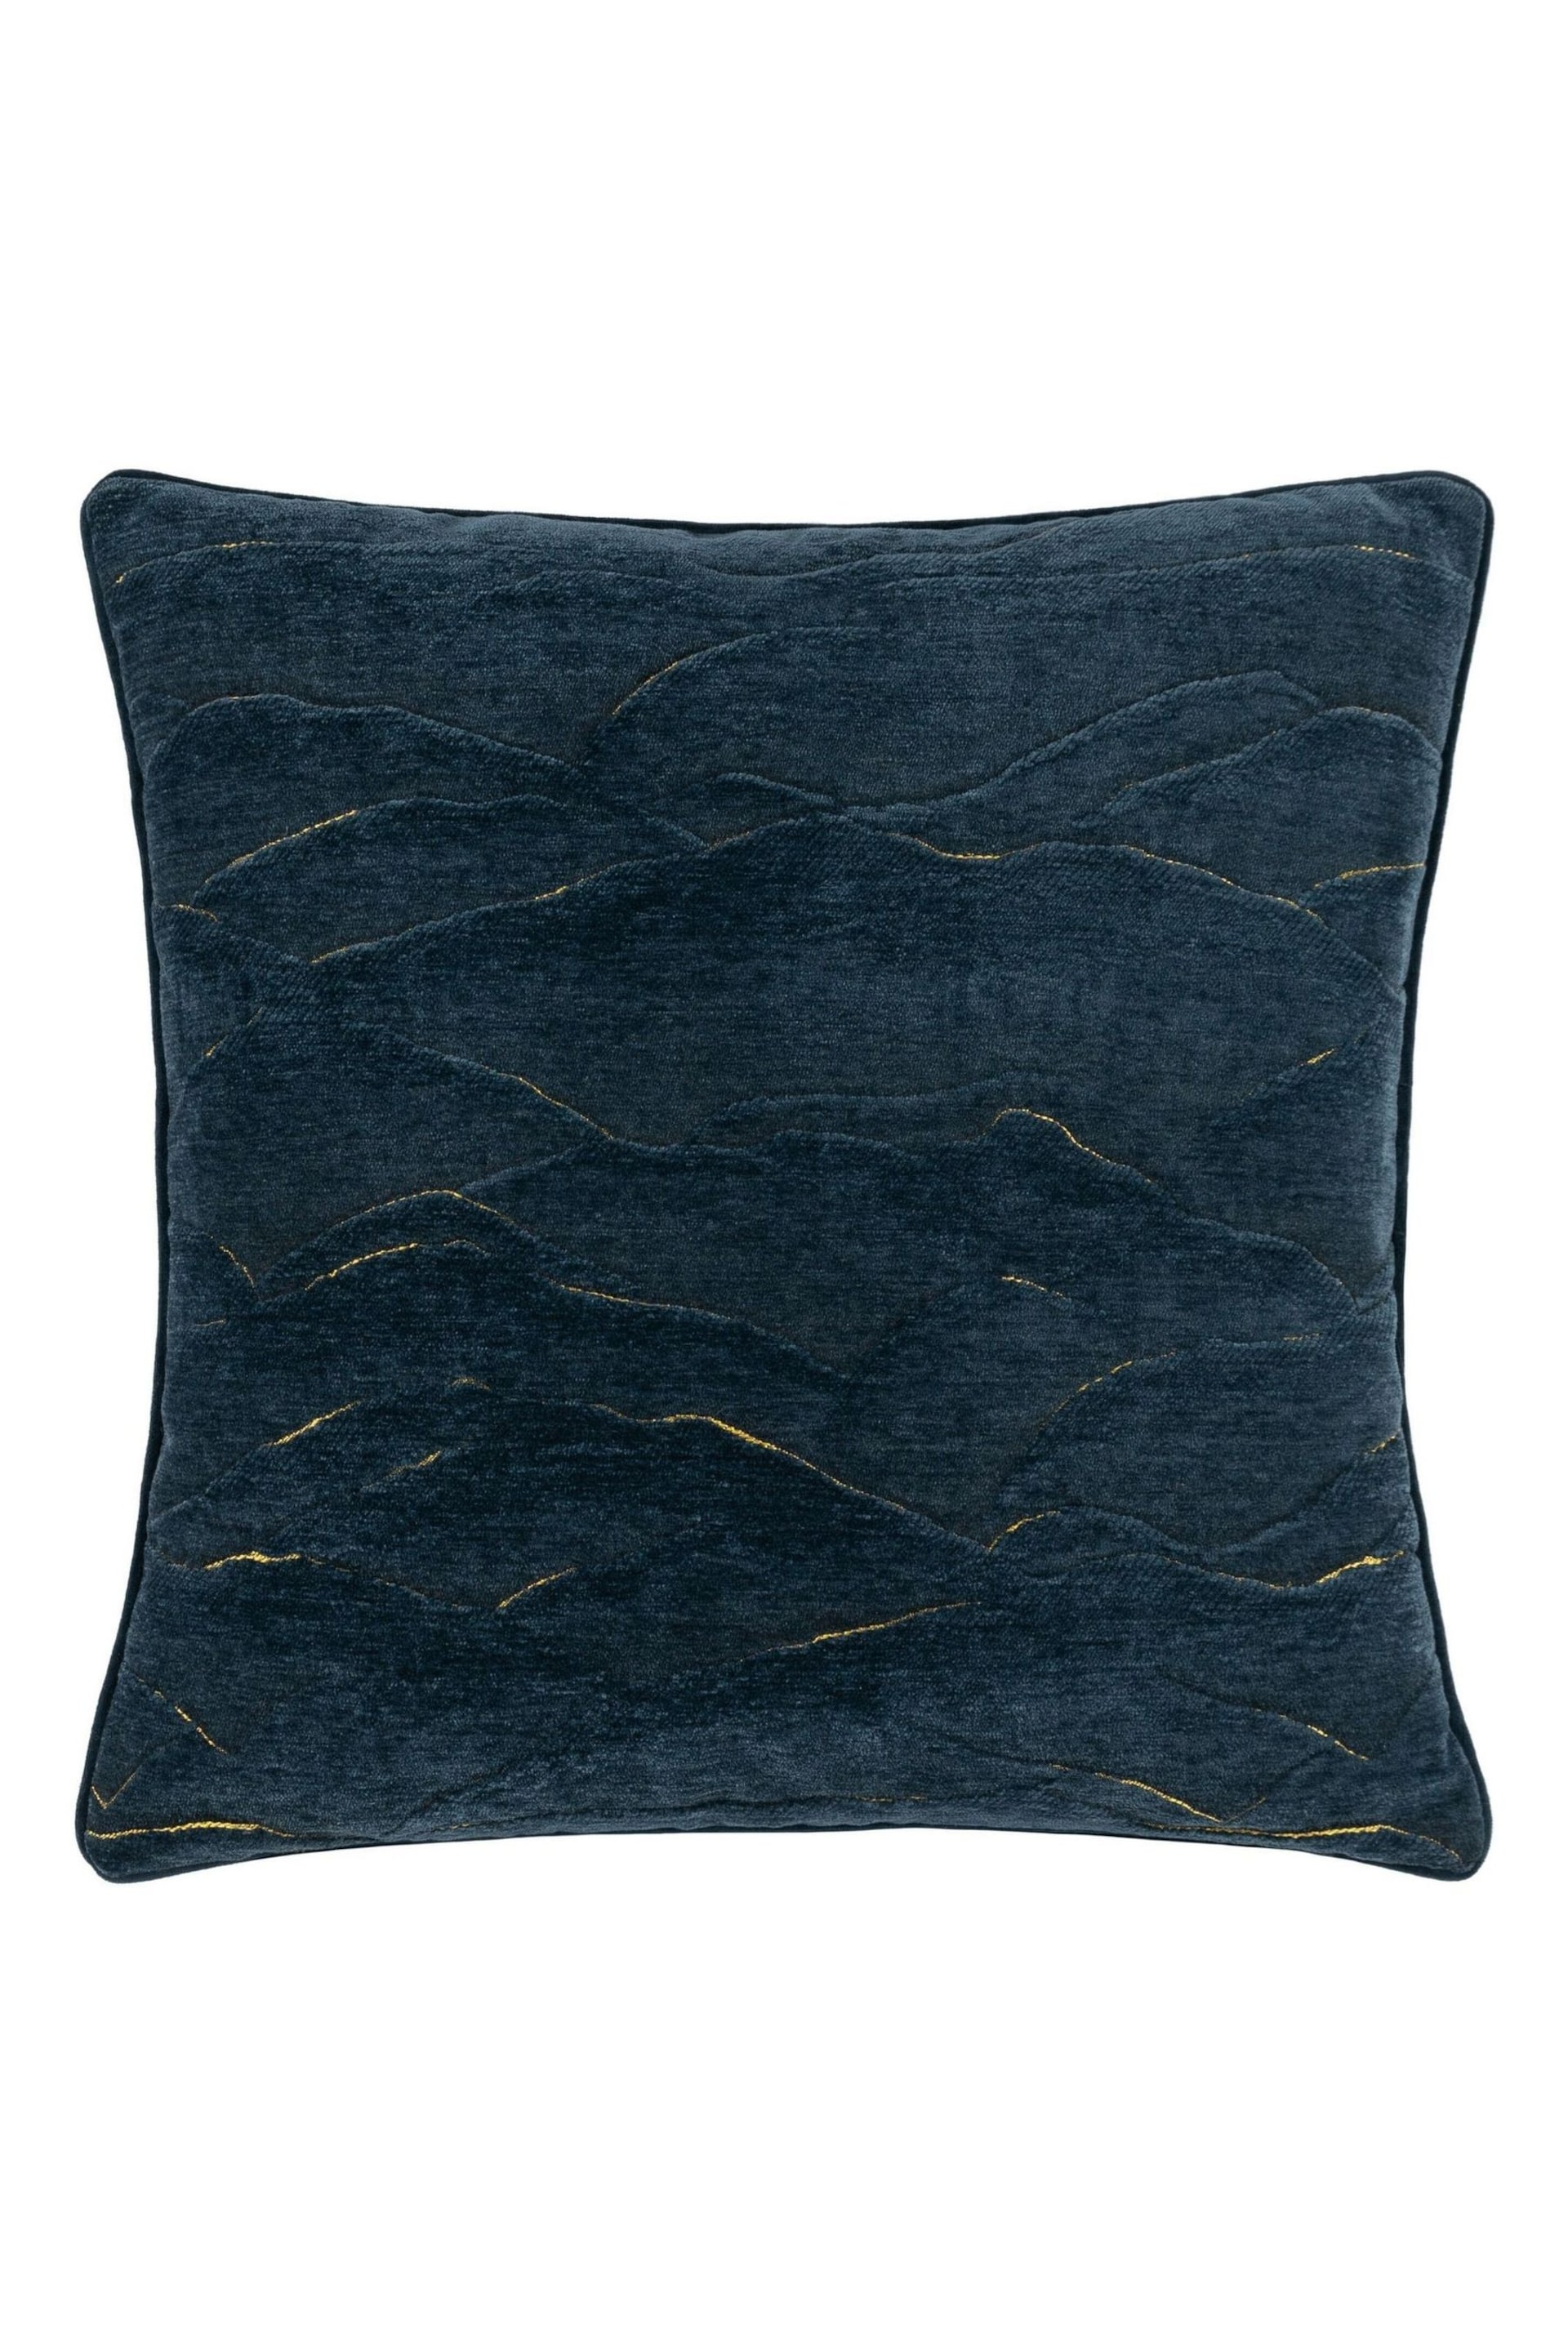 Paoletti Blue Stratus Jacquard Polyester Filled Cushion - Image 2 of 6